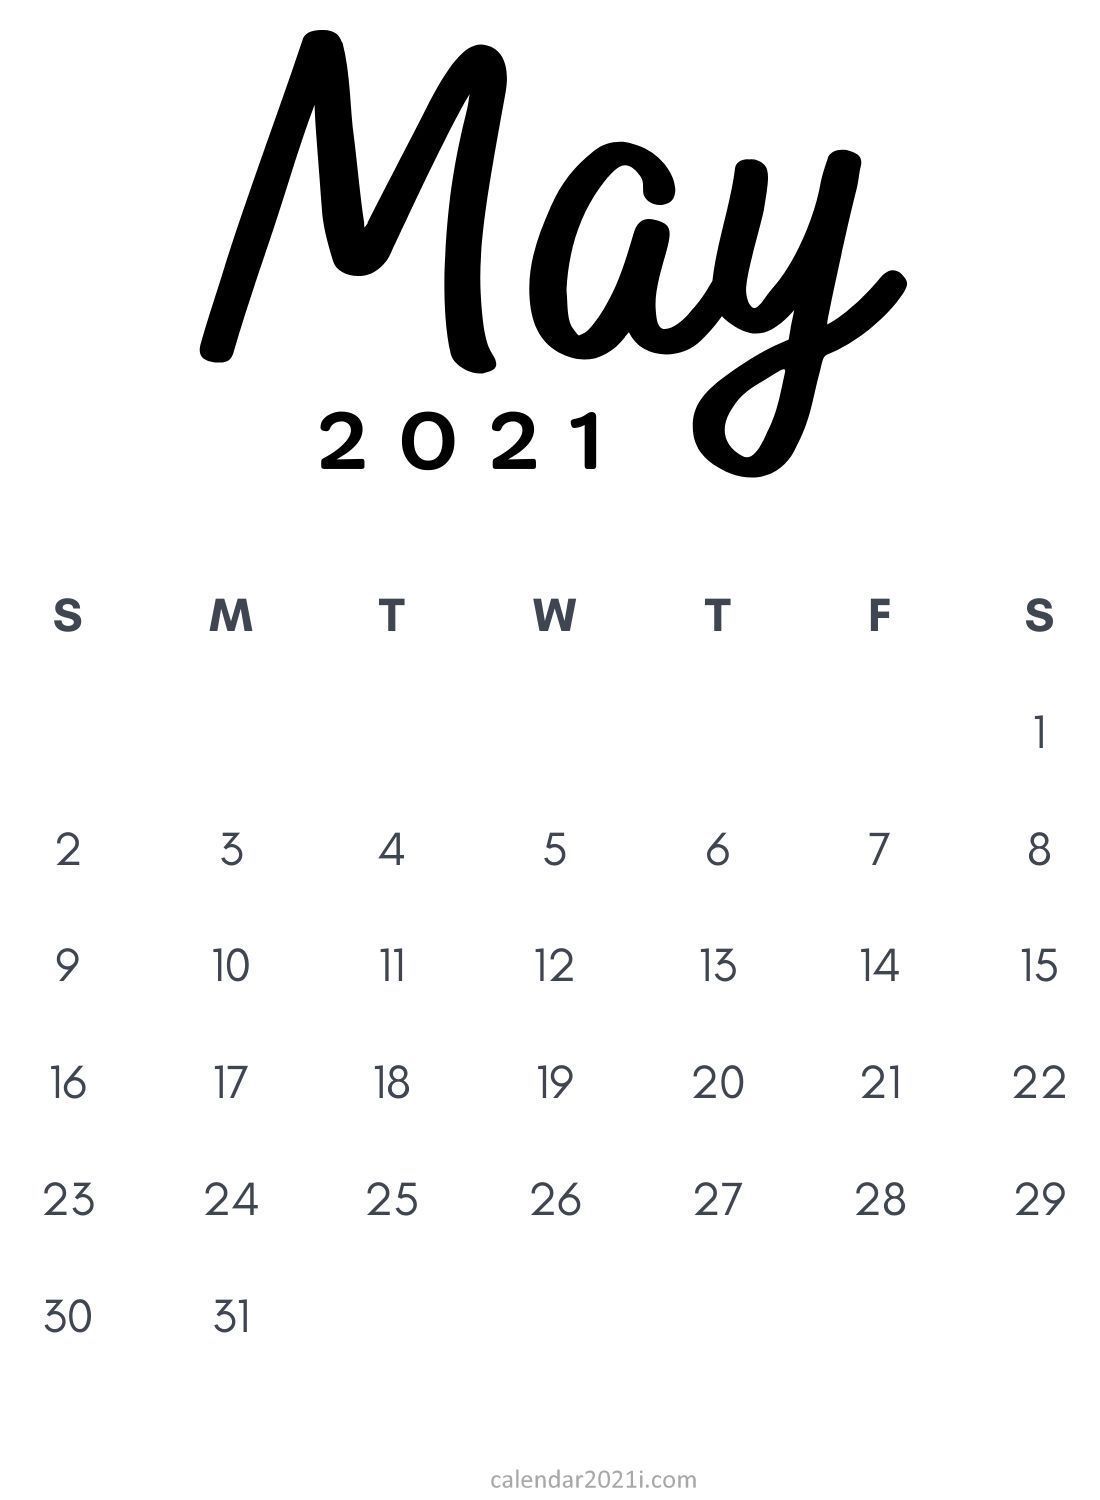 May 2021 Minimalist Printable Calendar design in black and white appearance. Monthly calendar printable, Printable calendar , 2021 calendar